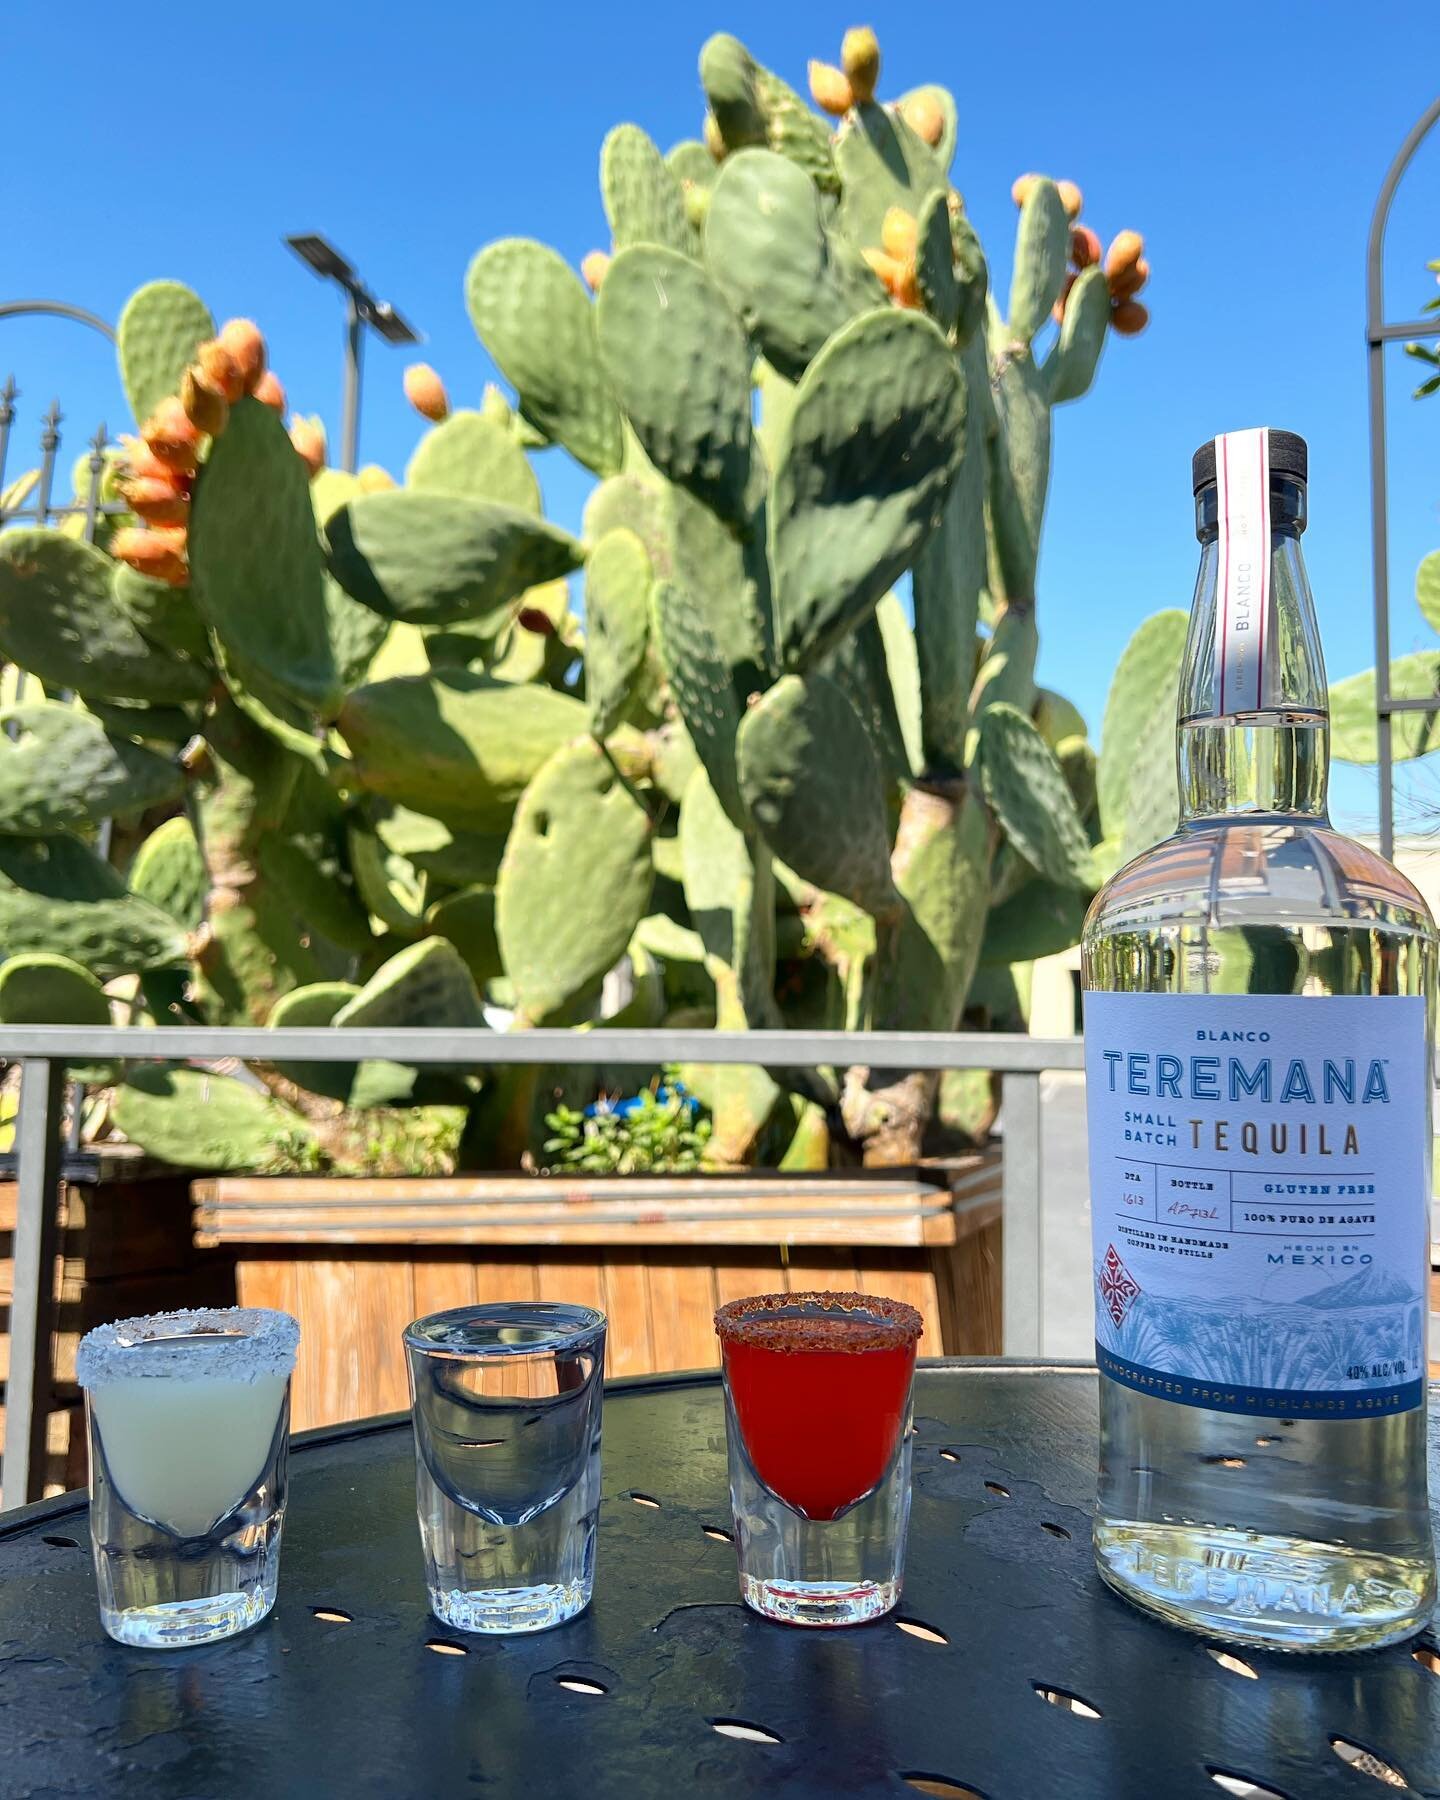 Celebrate 16 de Septiembre (Mexican Independance Day) at Guadalajara Grill this Saturday!

New special to commemorate the day will be &ldquo;Bandera&rdquo; - classic festive drink featuring three shots that when combined form the vibrant Mexican flag